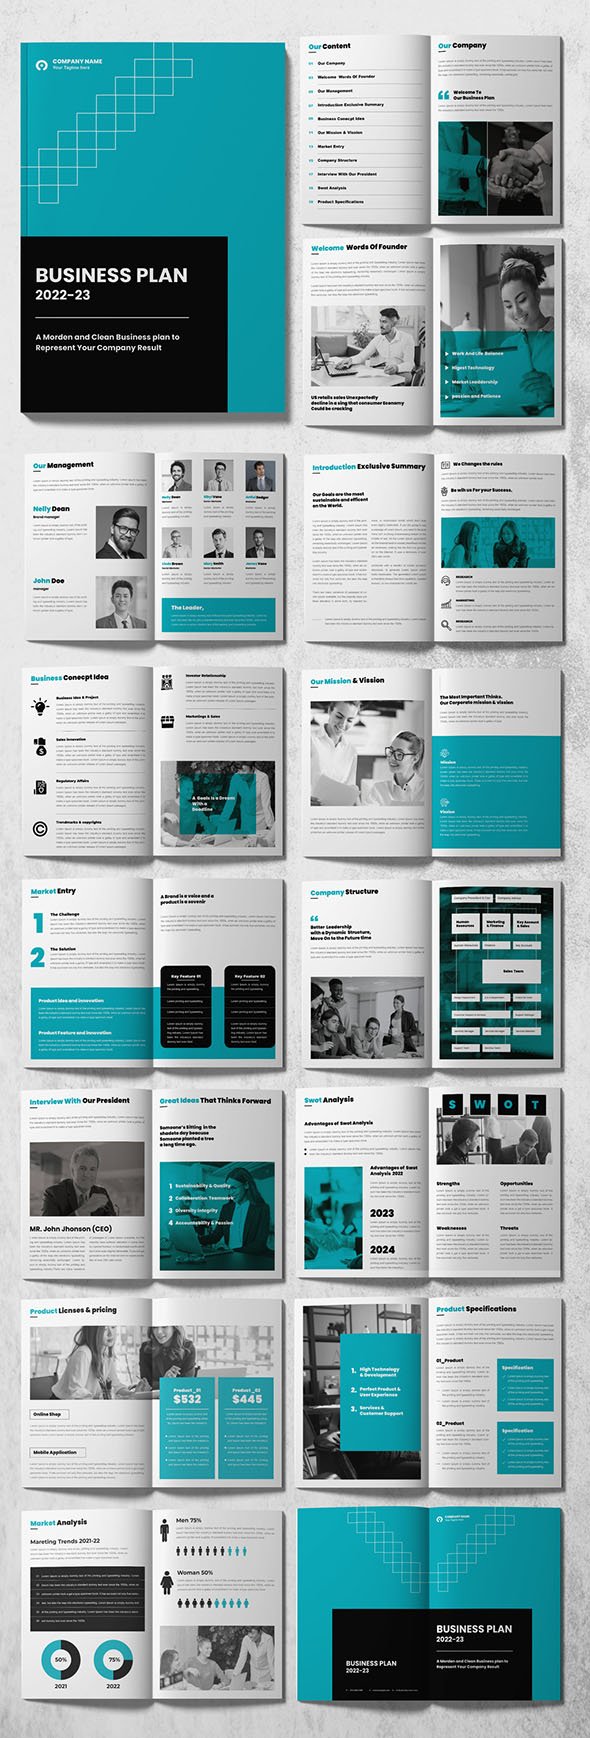 AdobeStock - Business Plan Layout with Blue Accents - 513056230